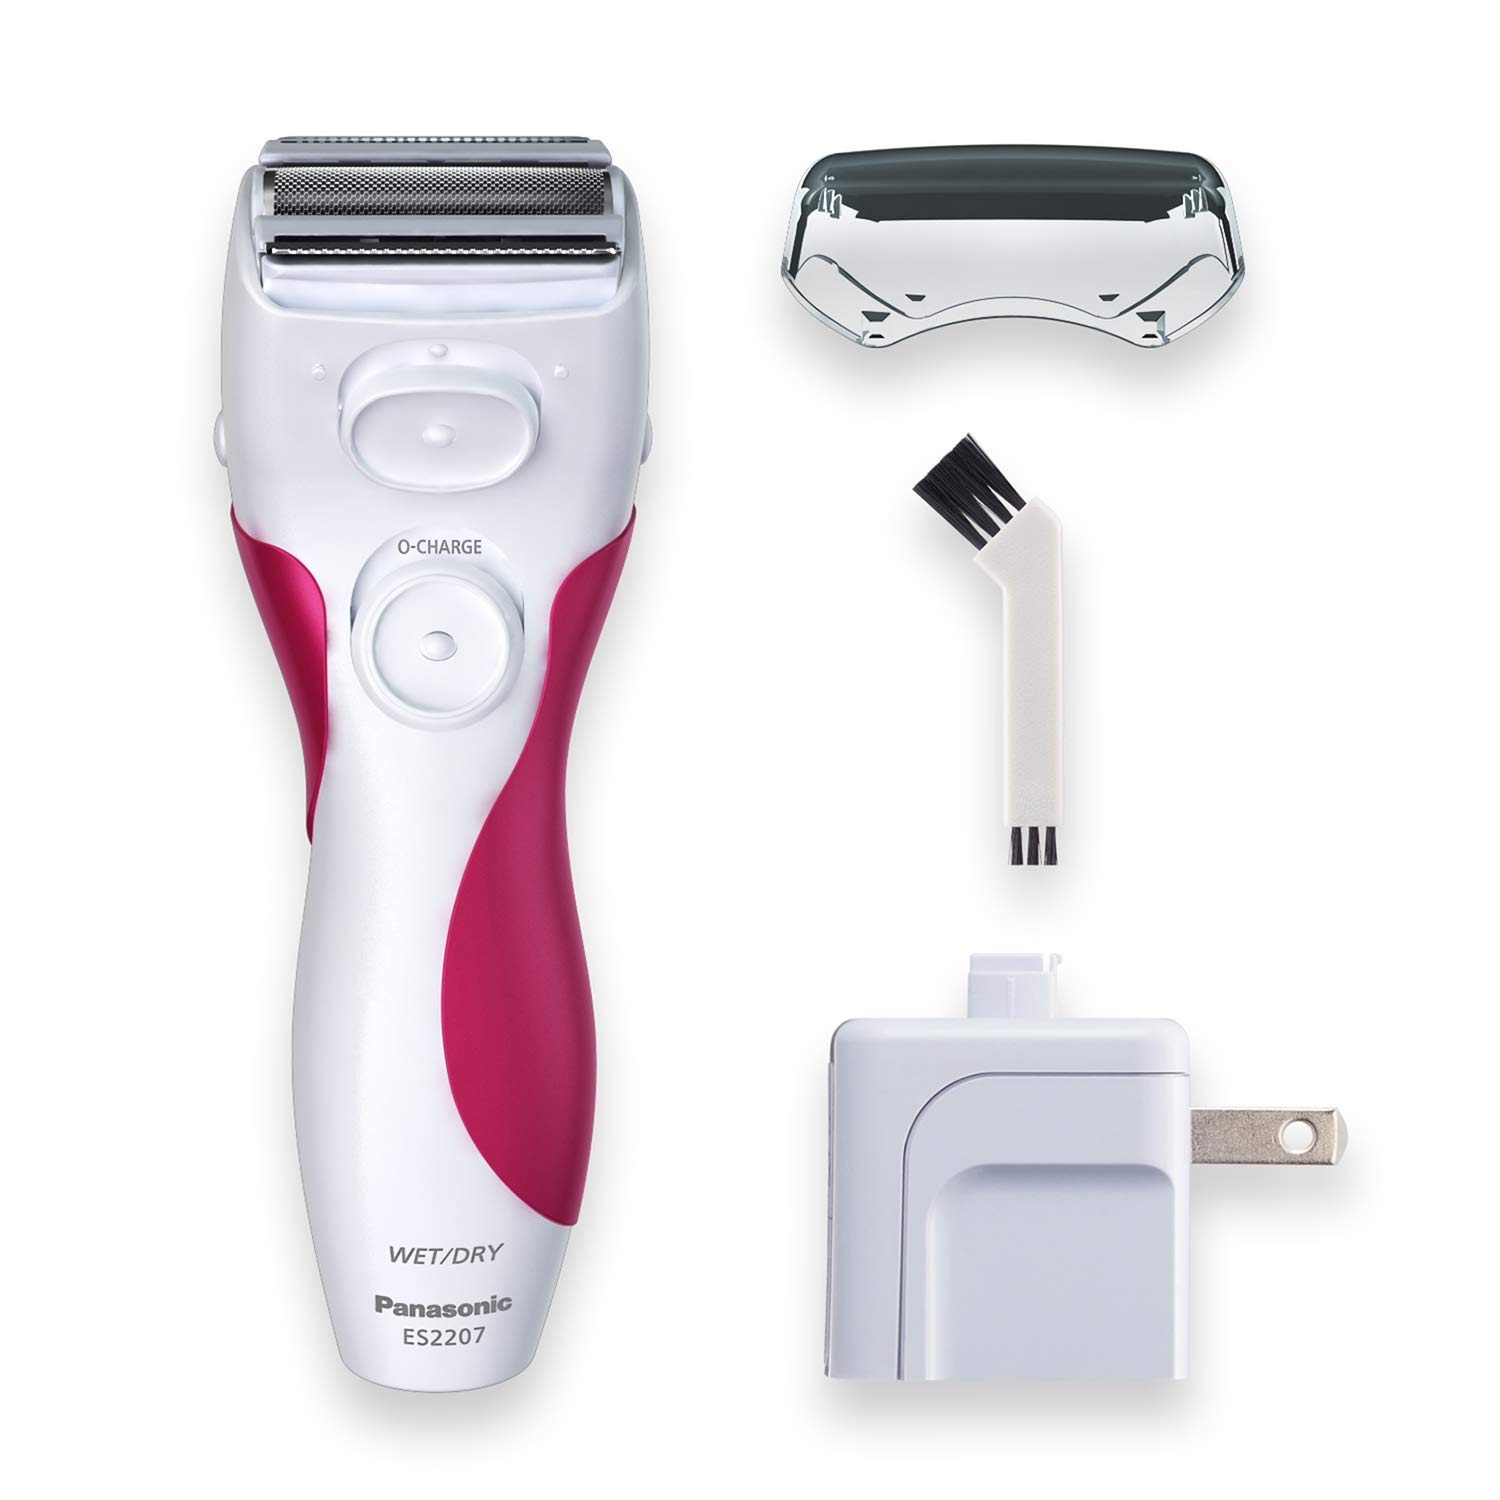 Panasonic ES2207P Ladies Electric Shaver, 3-Blade Cordless Women’s Electric Razor with Pop-Up Trimmer, Use Wet or Dry - image 4 of 5